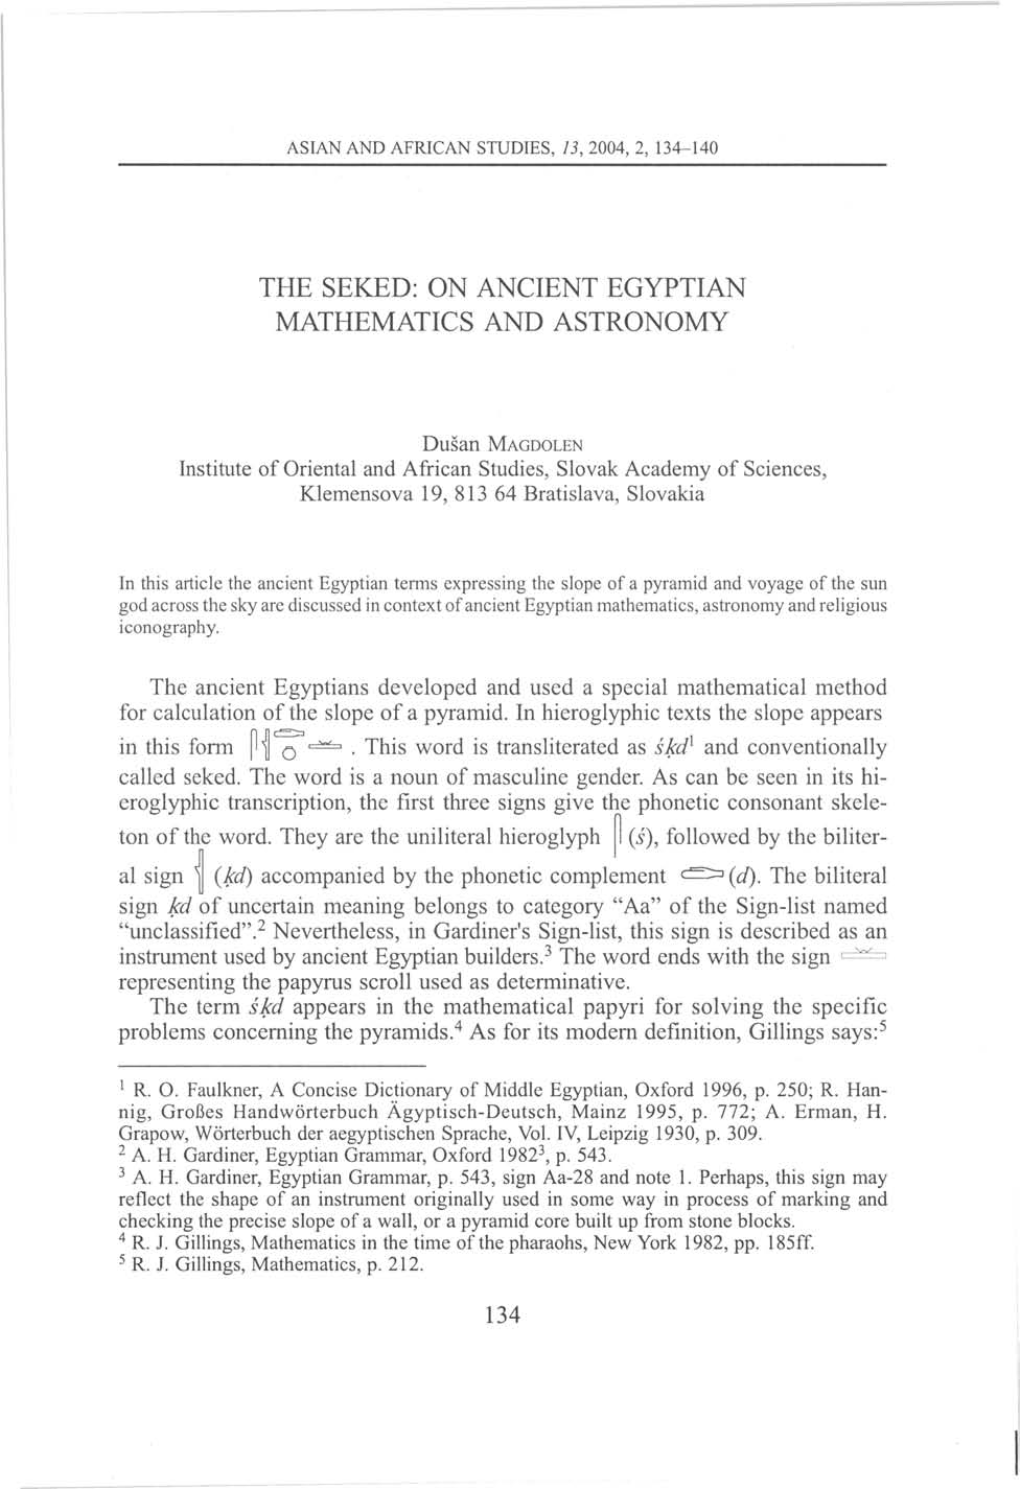 On Ancient Egyptian Mathematics and Astronomy